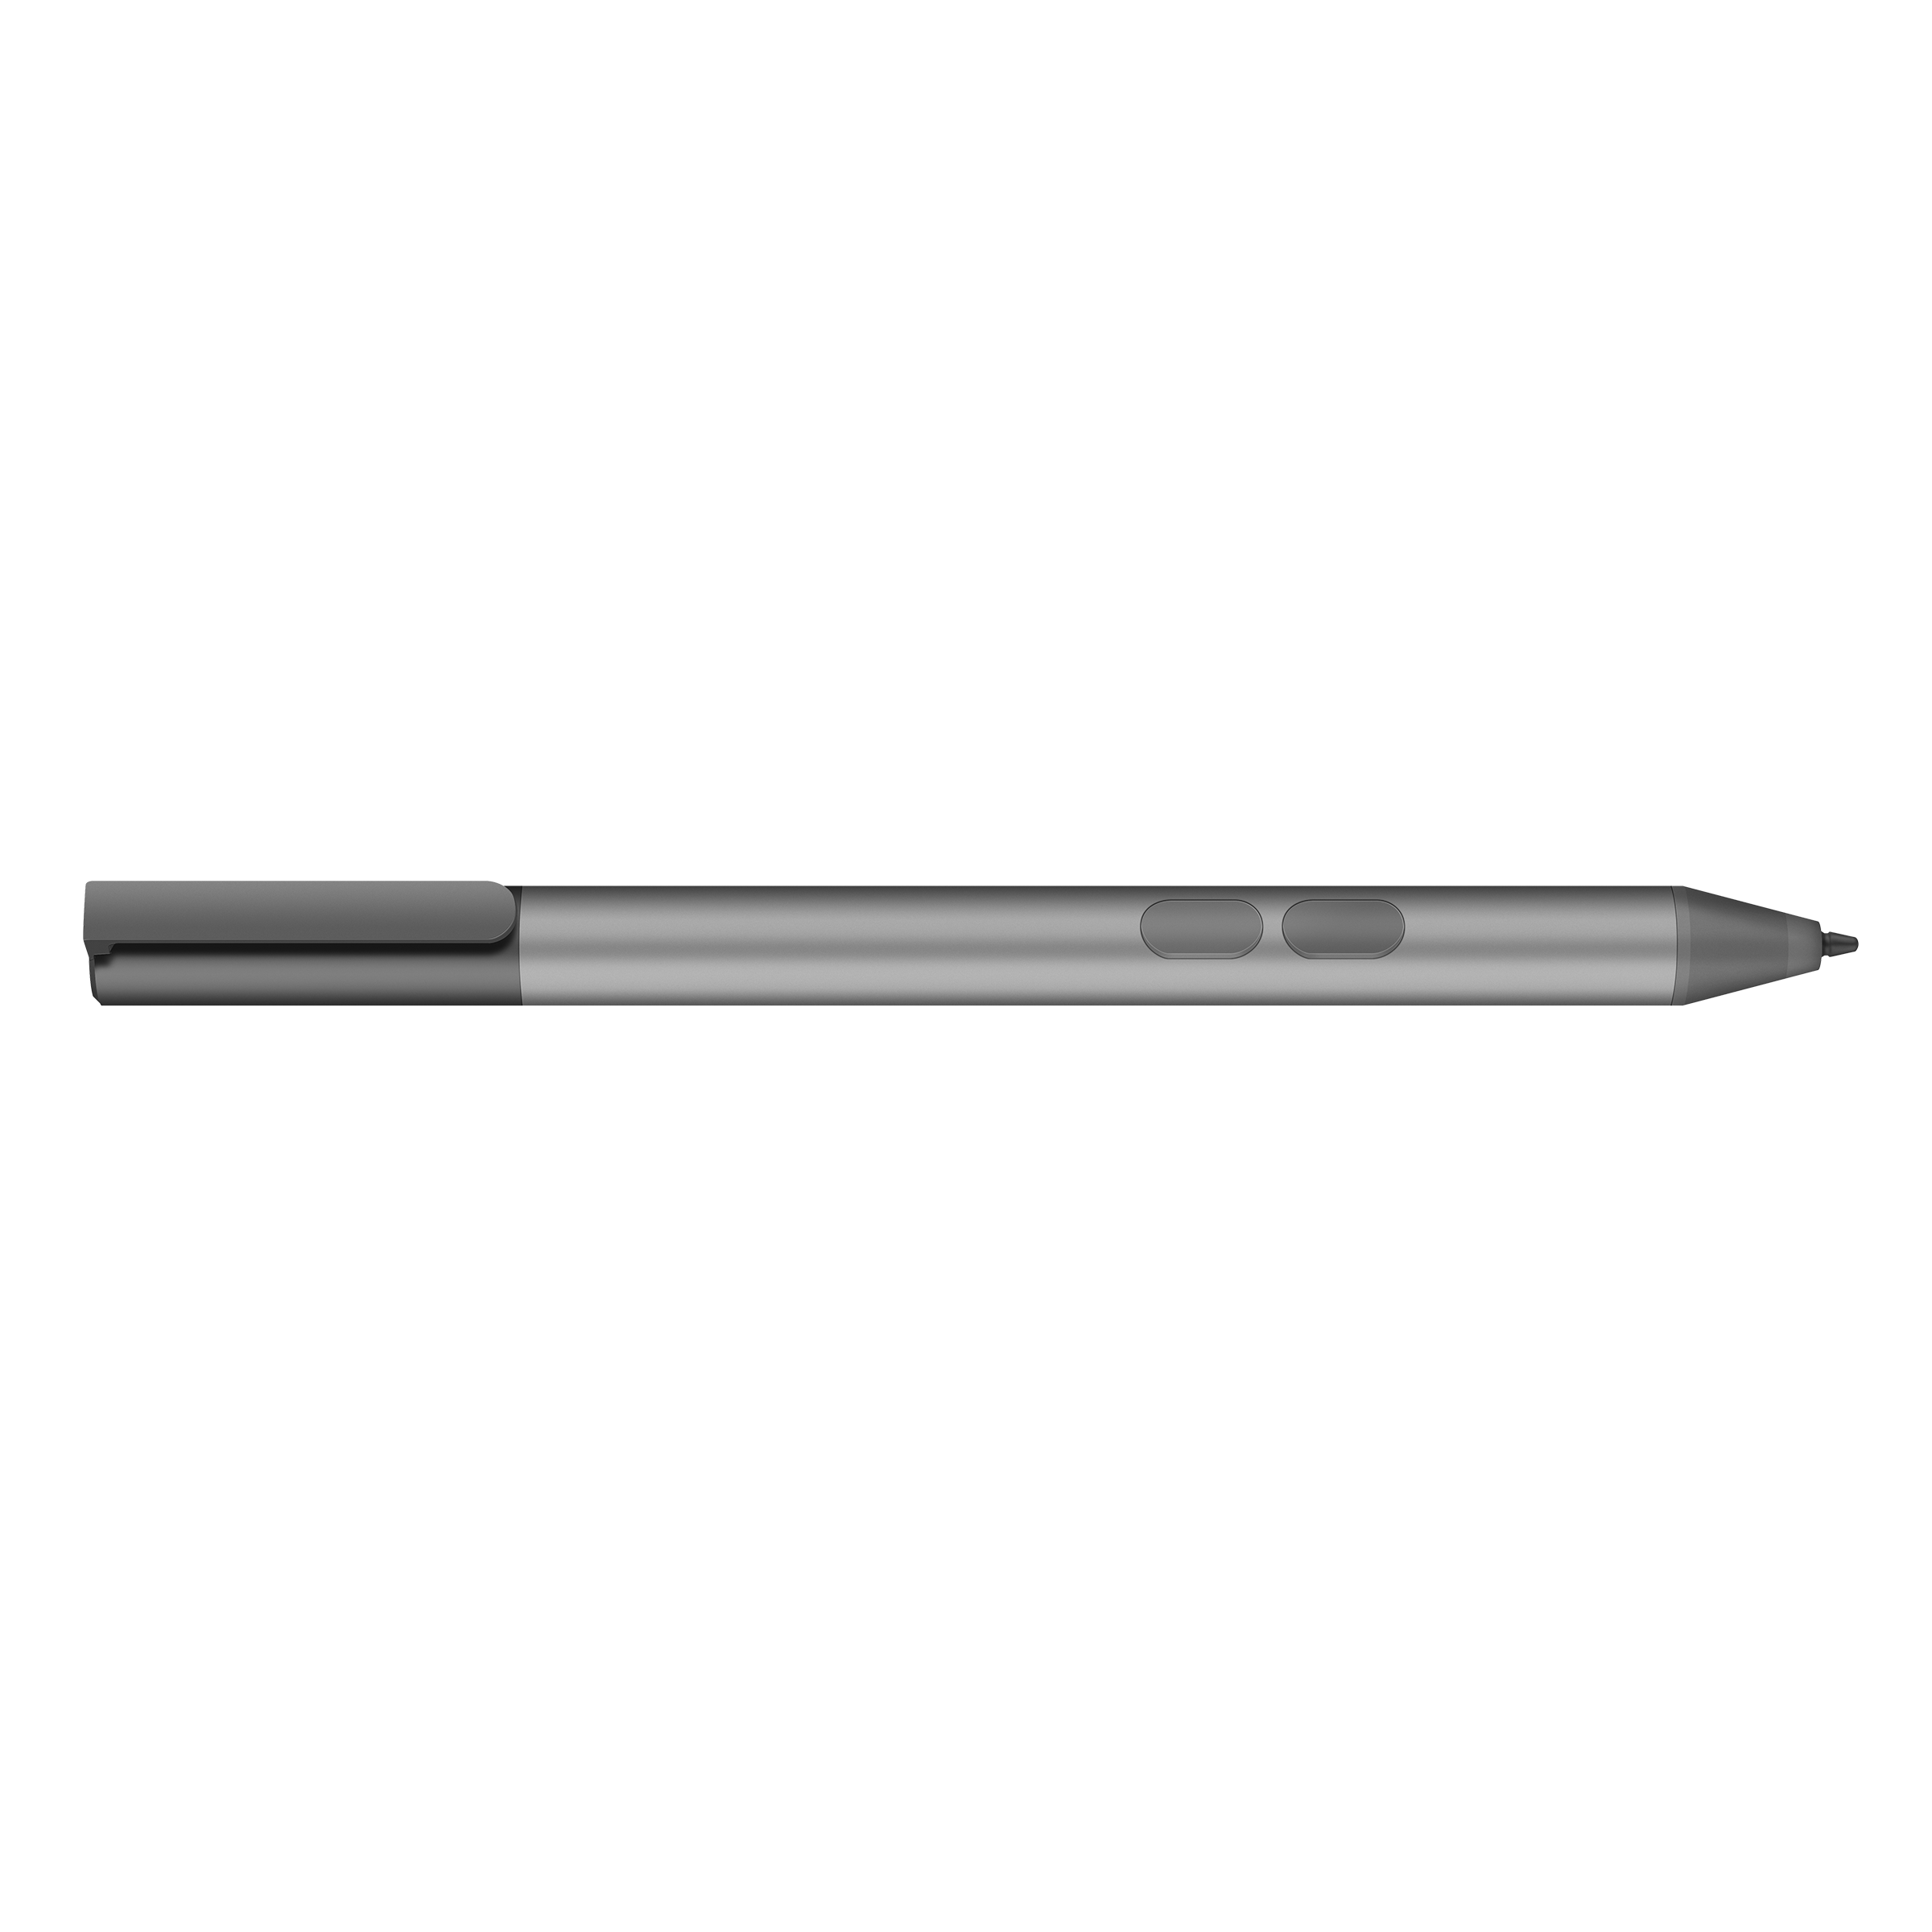 Compatible with The ASUS Laptop 15 X509MA 15.6 Laptop Broonel Red Fine Point Digital Active Stylus Pen